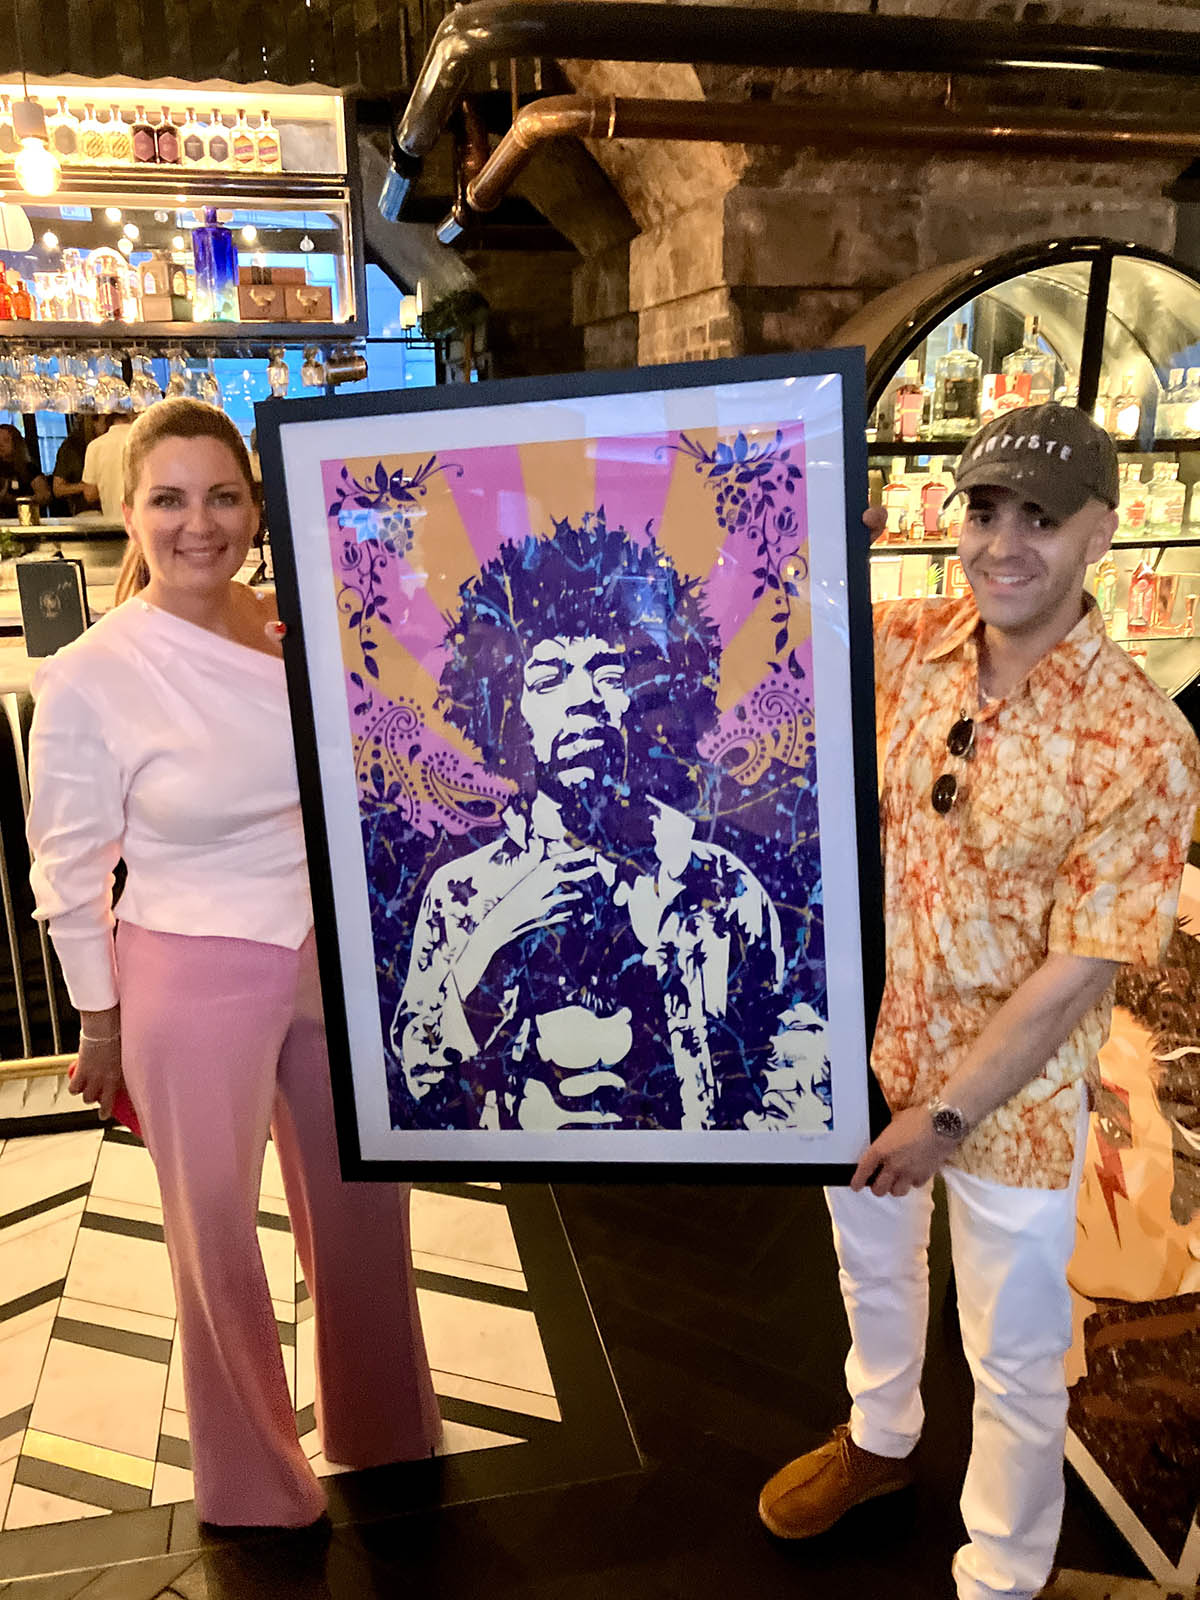 Kerwin Blackburn presenting a hand-embellished Jimi Hendrix print to its new owner in Manchester